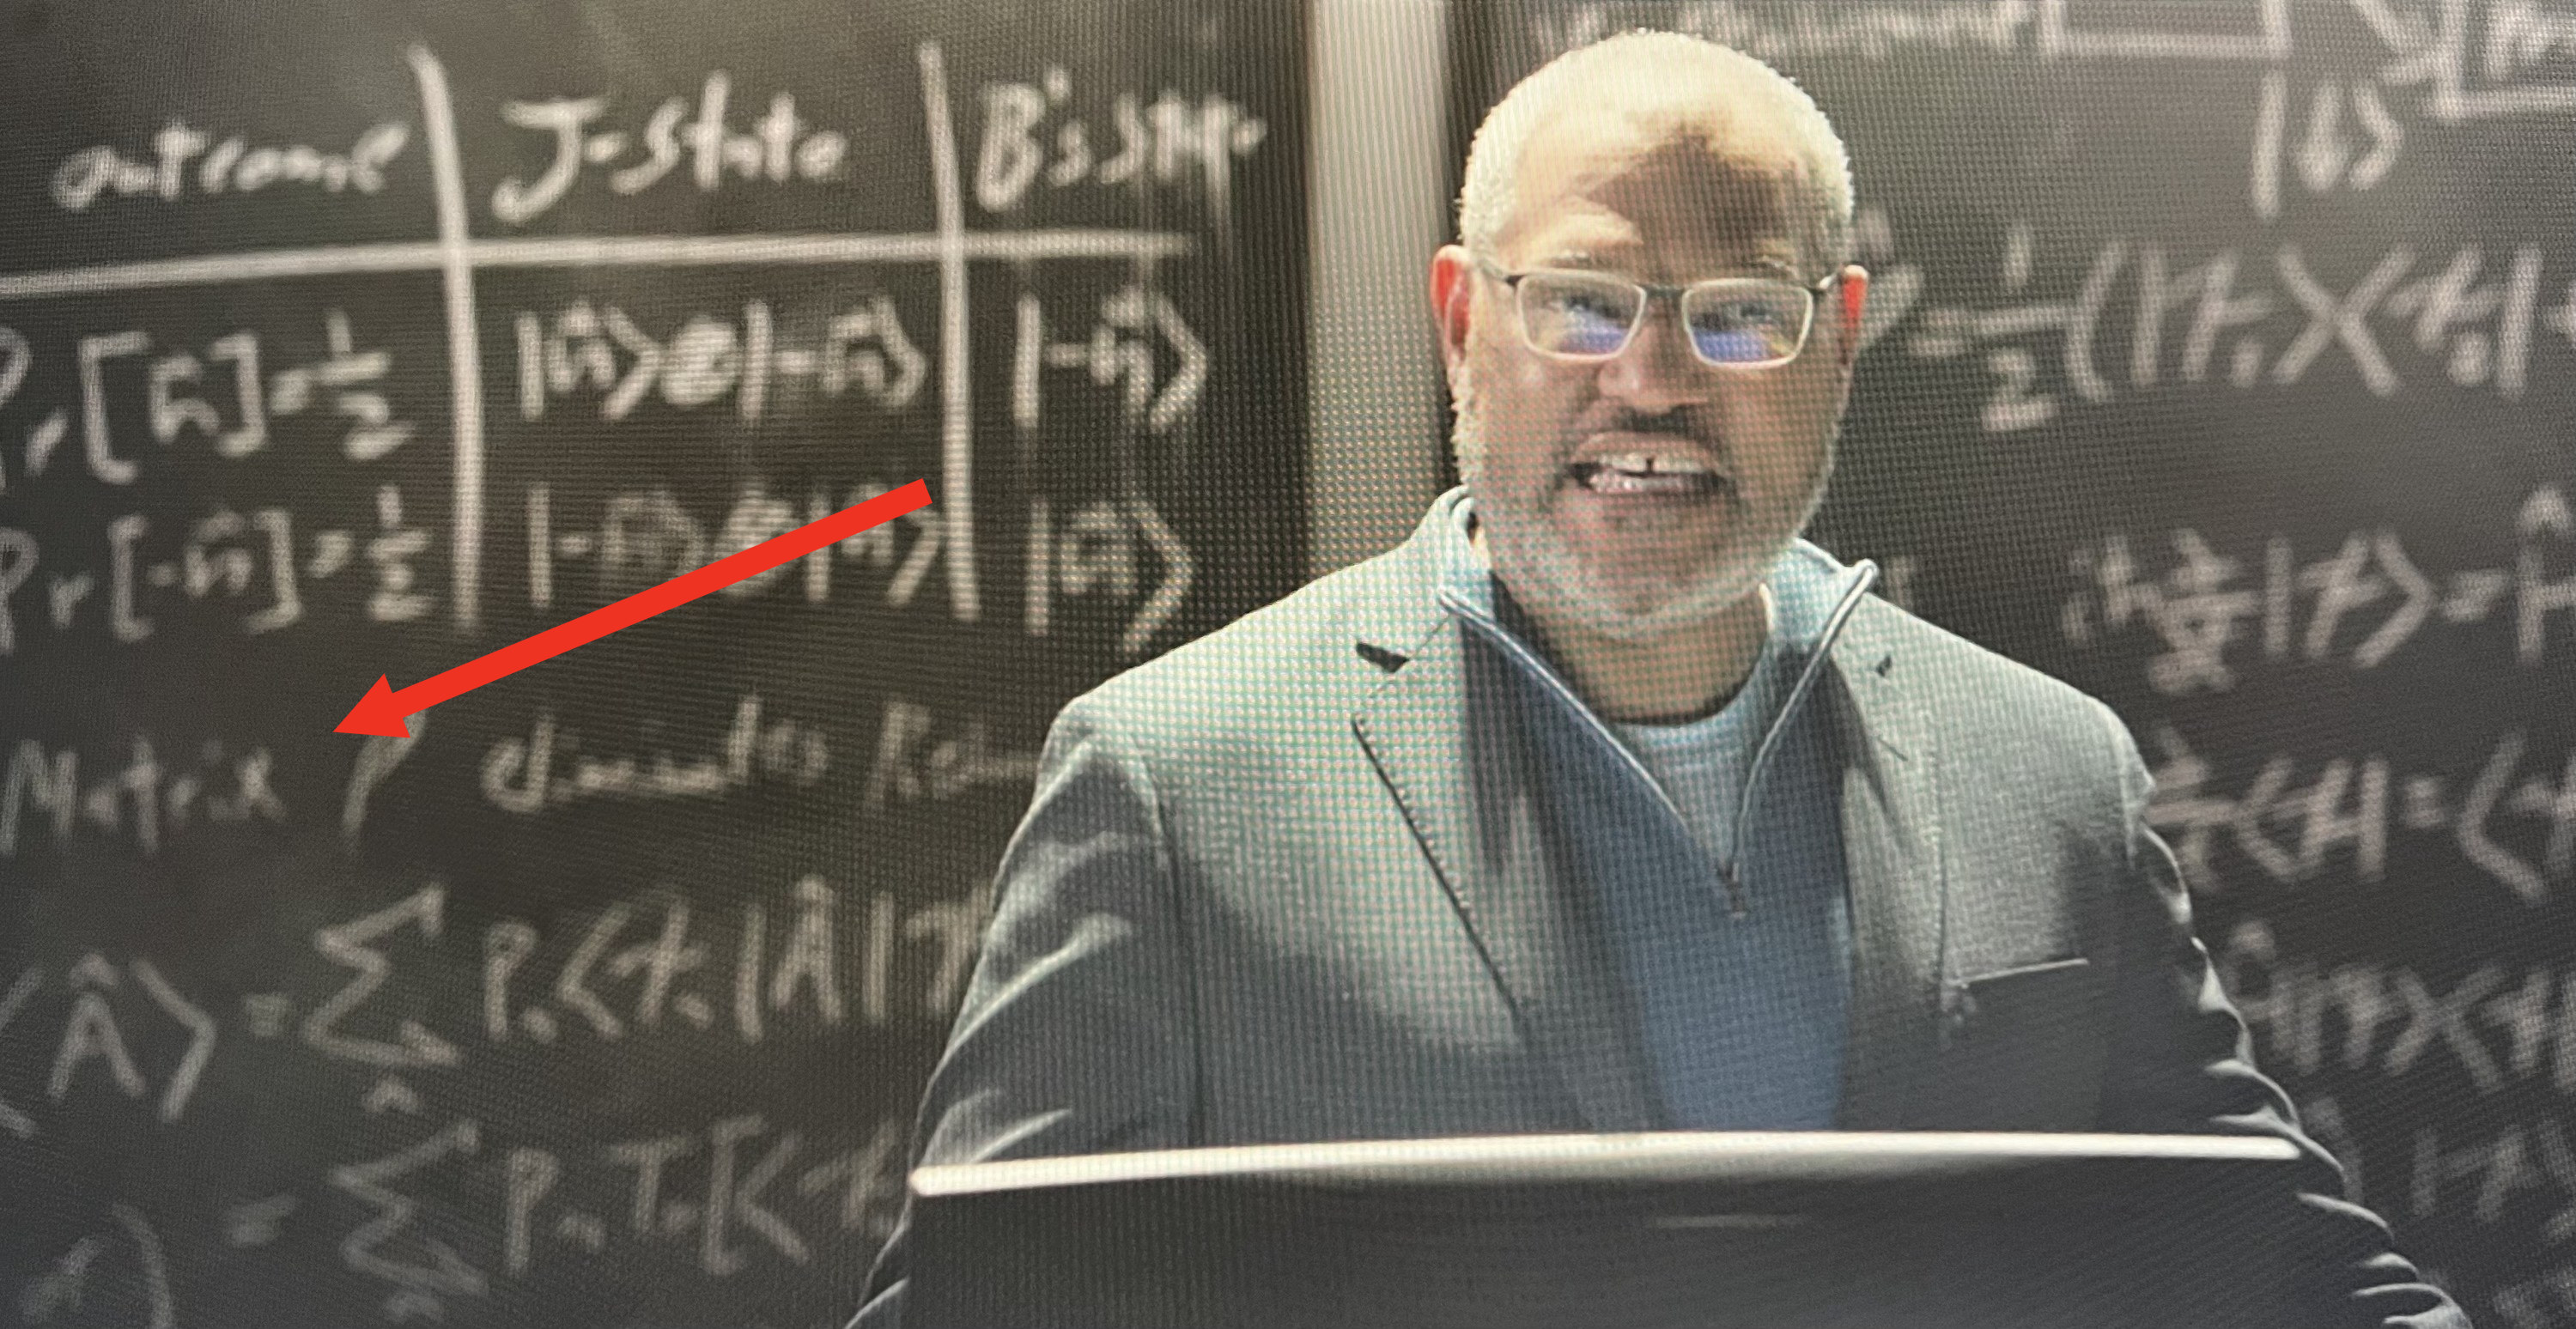 &quot;Matrix&quot; on the chalkboard in Ant Man and The Wasp